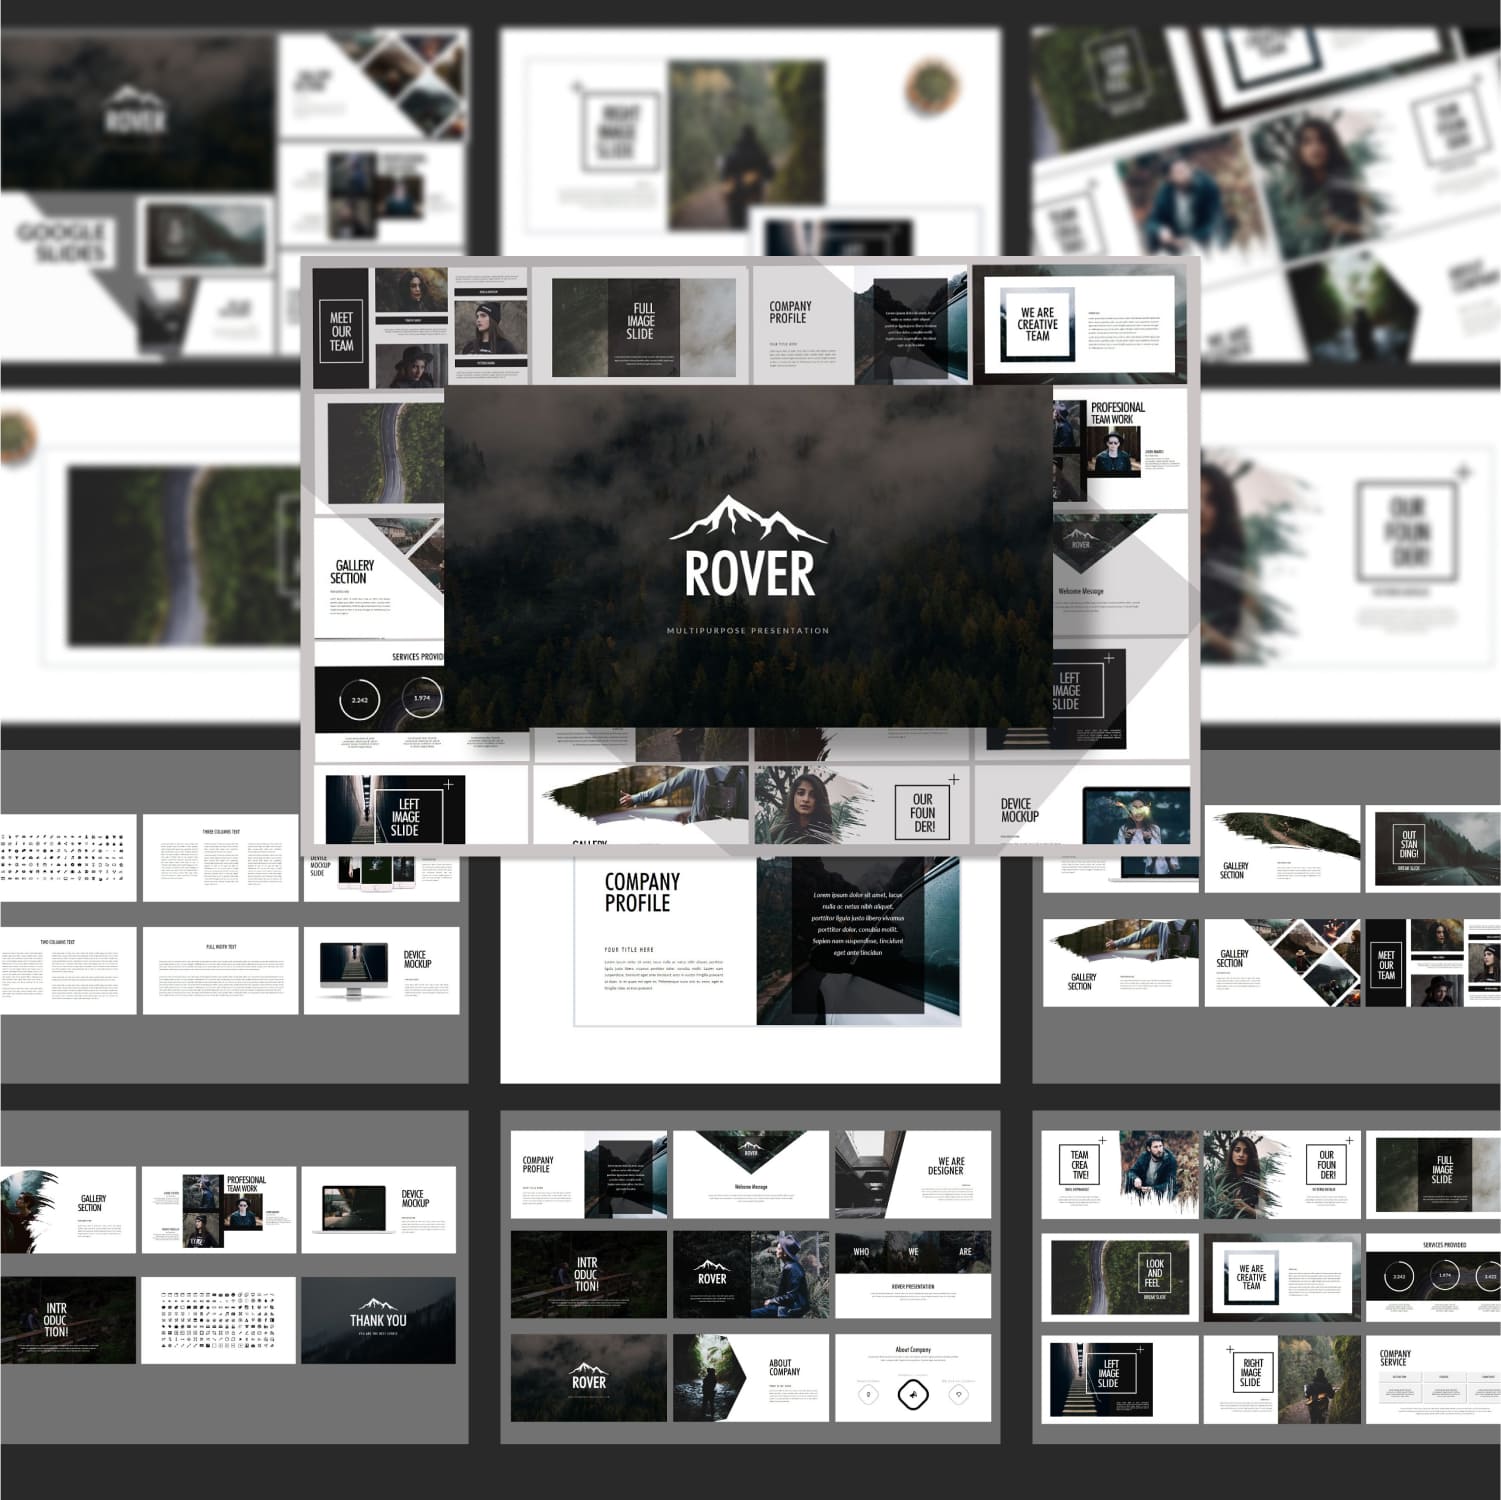 Rover is an adventure beautifully designed and functional professional Google Slides Presentation.